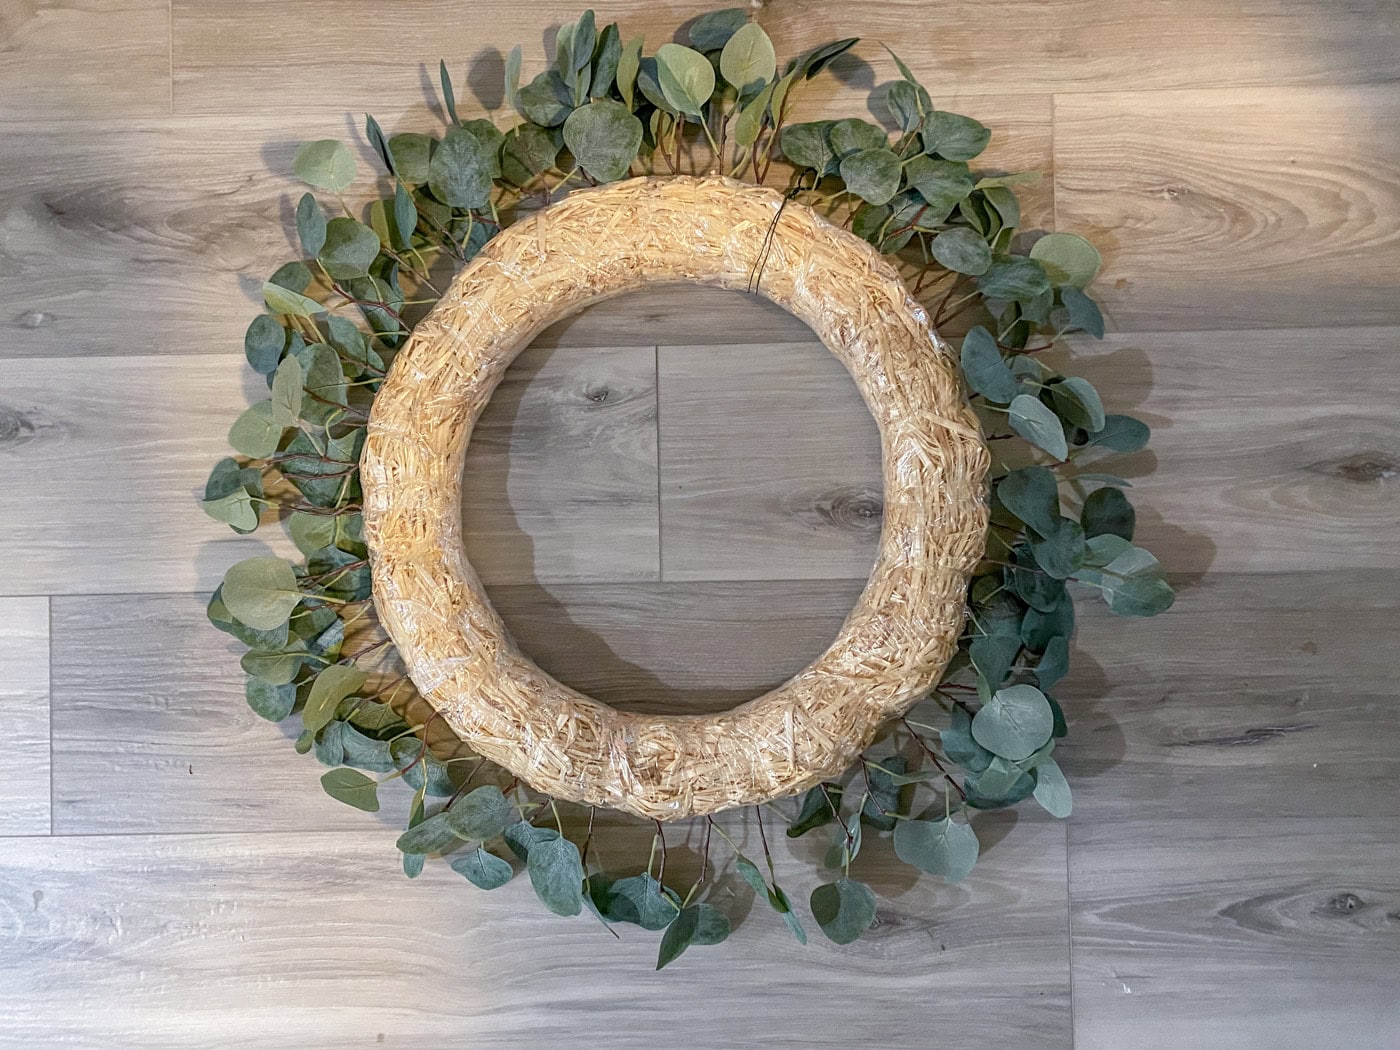 perimeter of straw wreath form lined with faux greenery stems